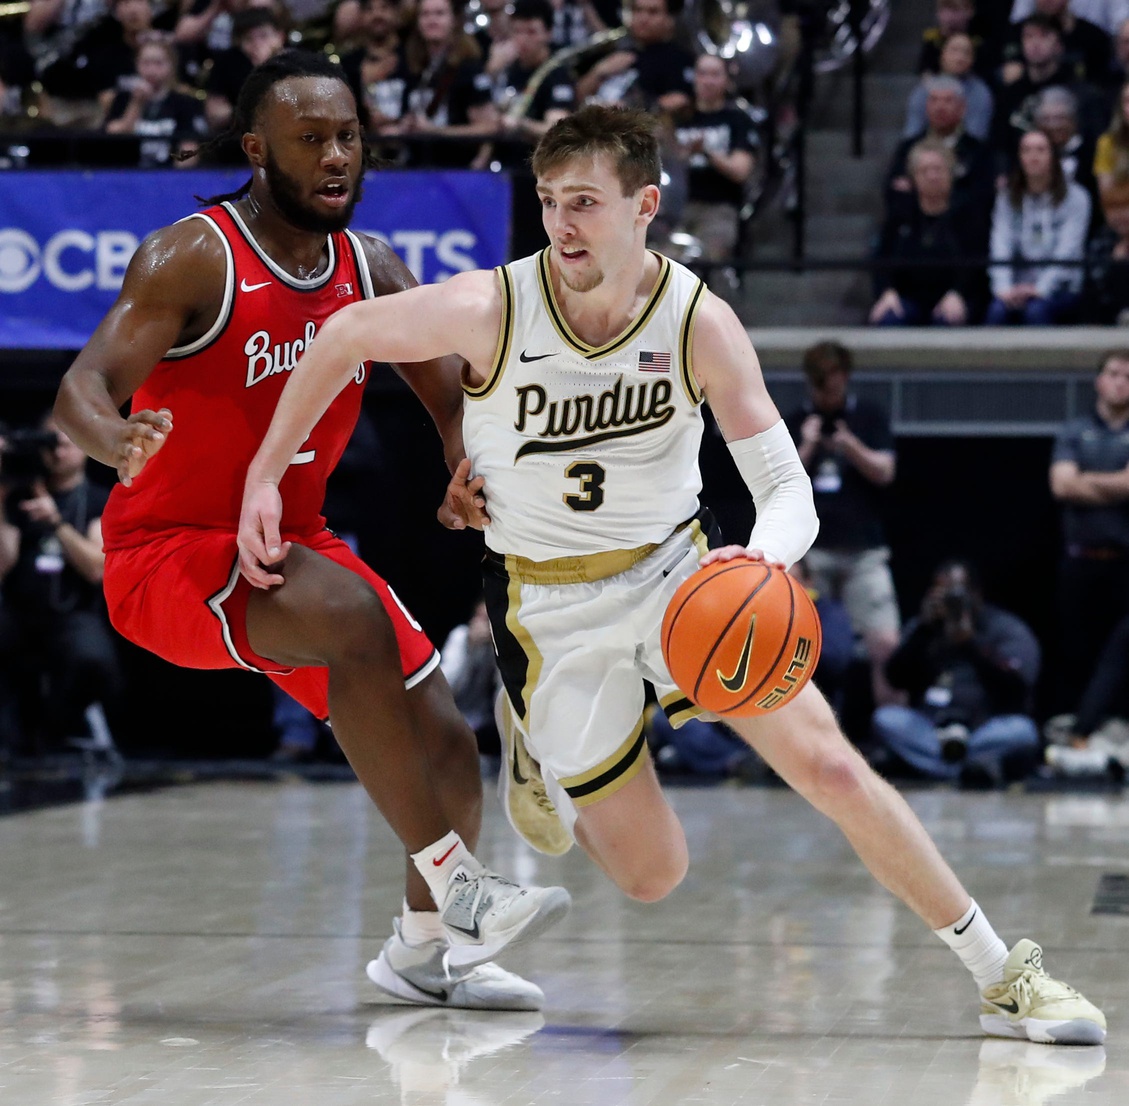 Ohio State vs. Purdue Prediction, Preview, and Odds - 3-11-2023